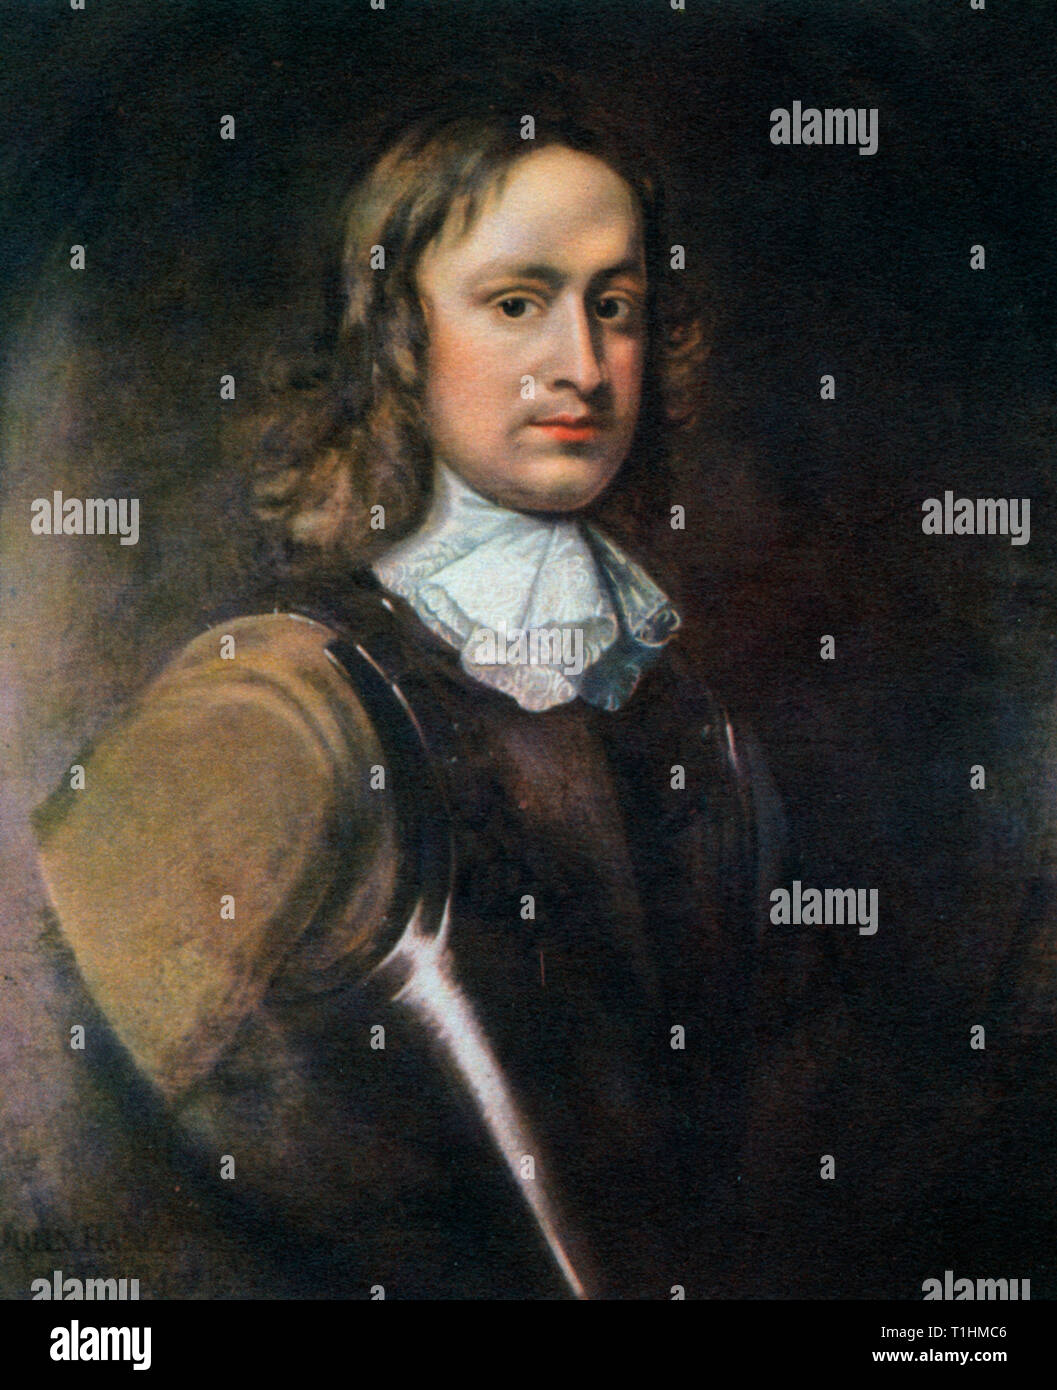 John Hampden (c1595-1643), 17th century. Attributed to Robert Walker (1599-1658). English politician and one of the leading Parliamentarians involved in challenging the authority of King Charles I. Hampden was one of the Five Members whose attempted unconstitutional arrest by King Charles I in the House of Commons in 1642 sparked the English Civil War. Stock Photo